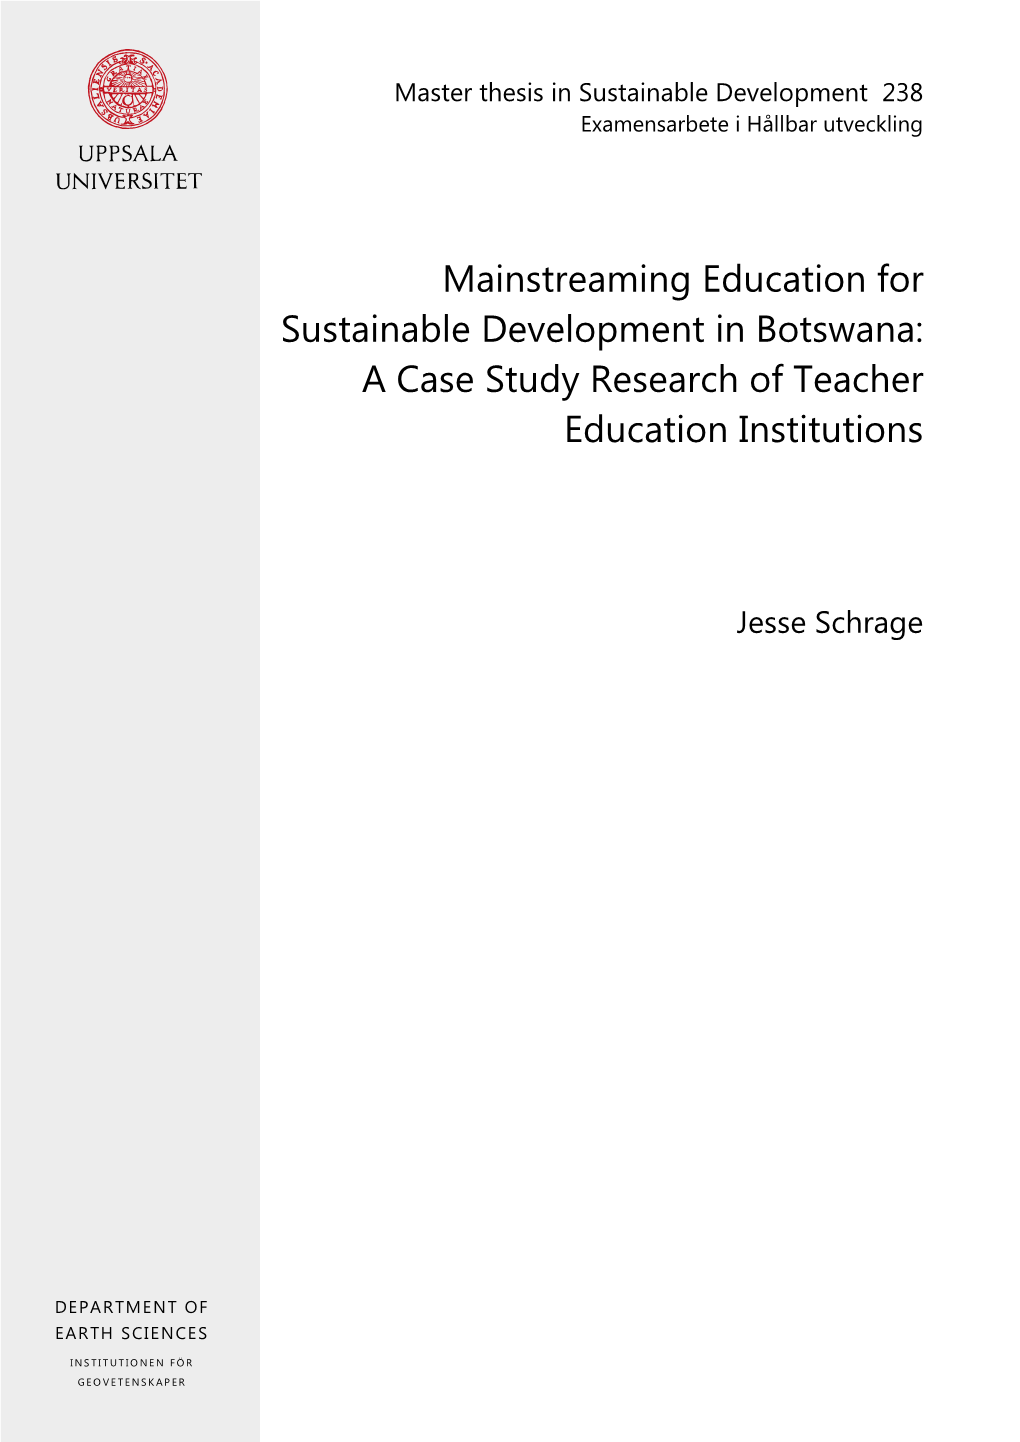 A Case Study Research of Teacher Education Institutions